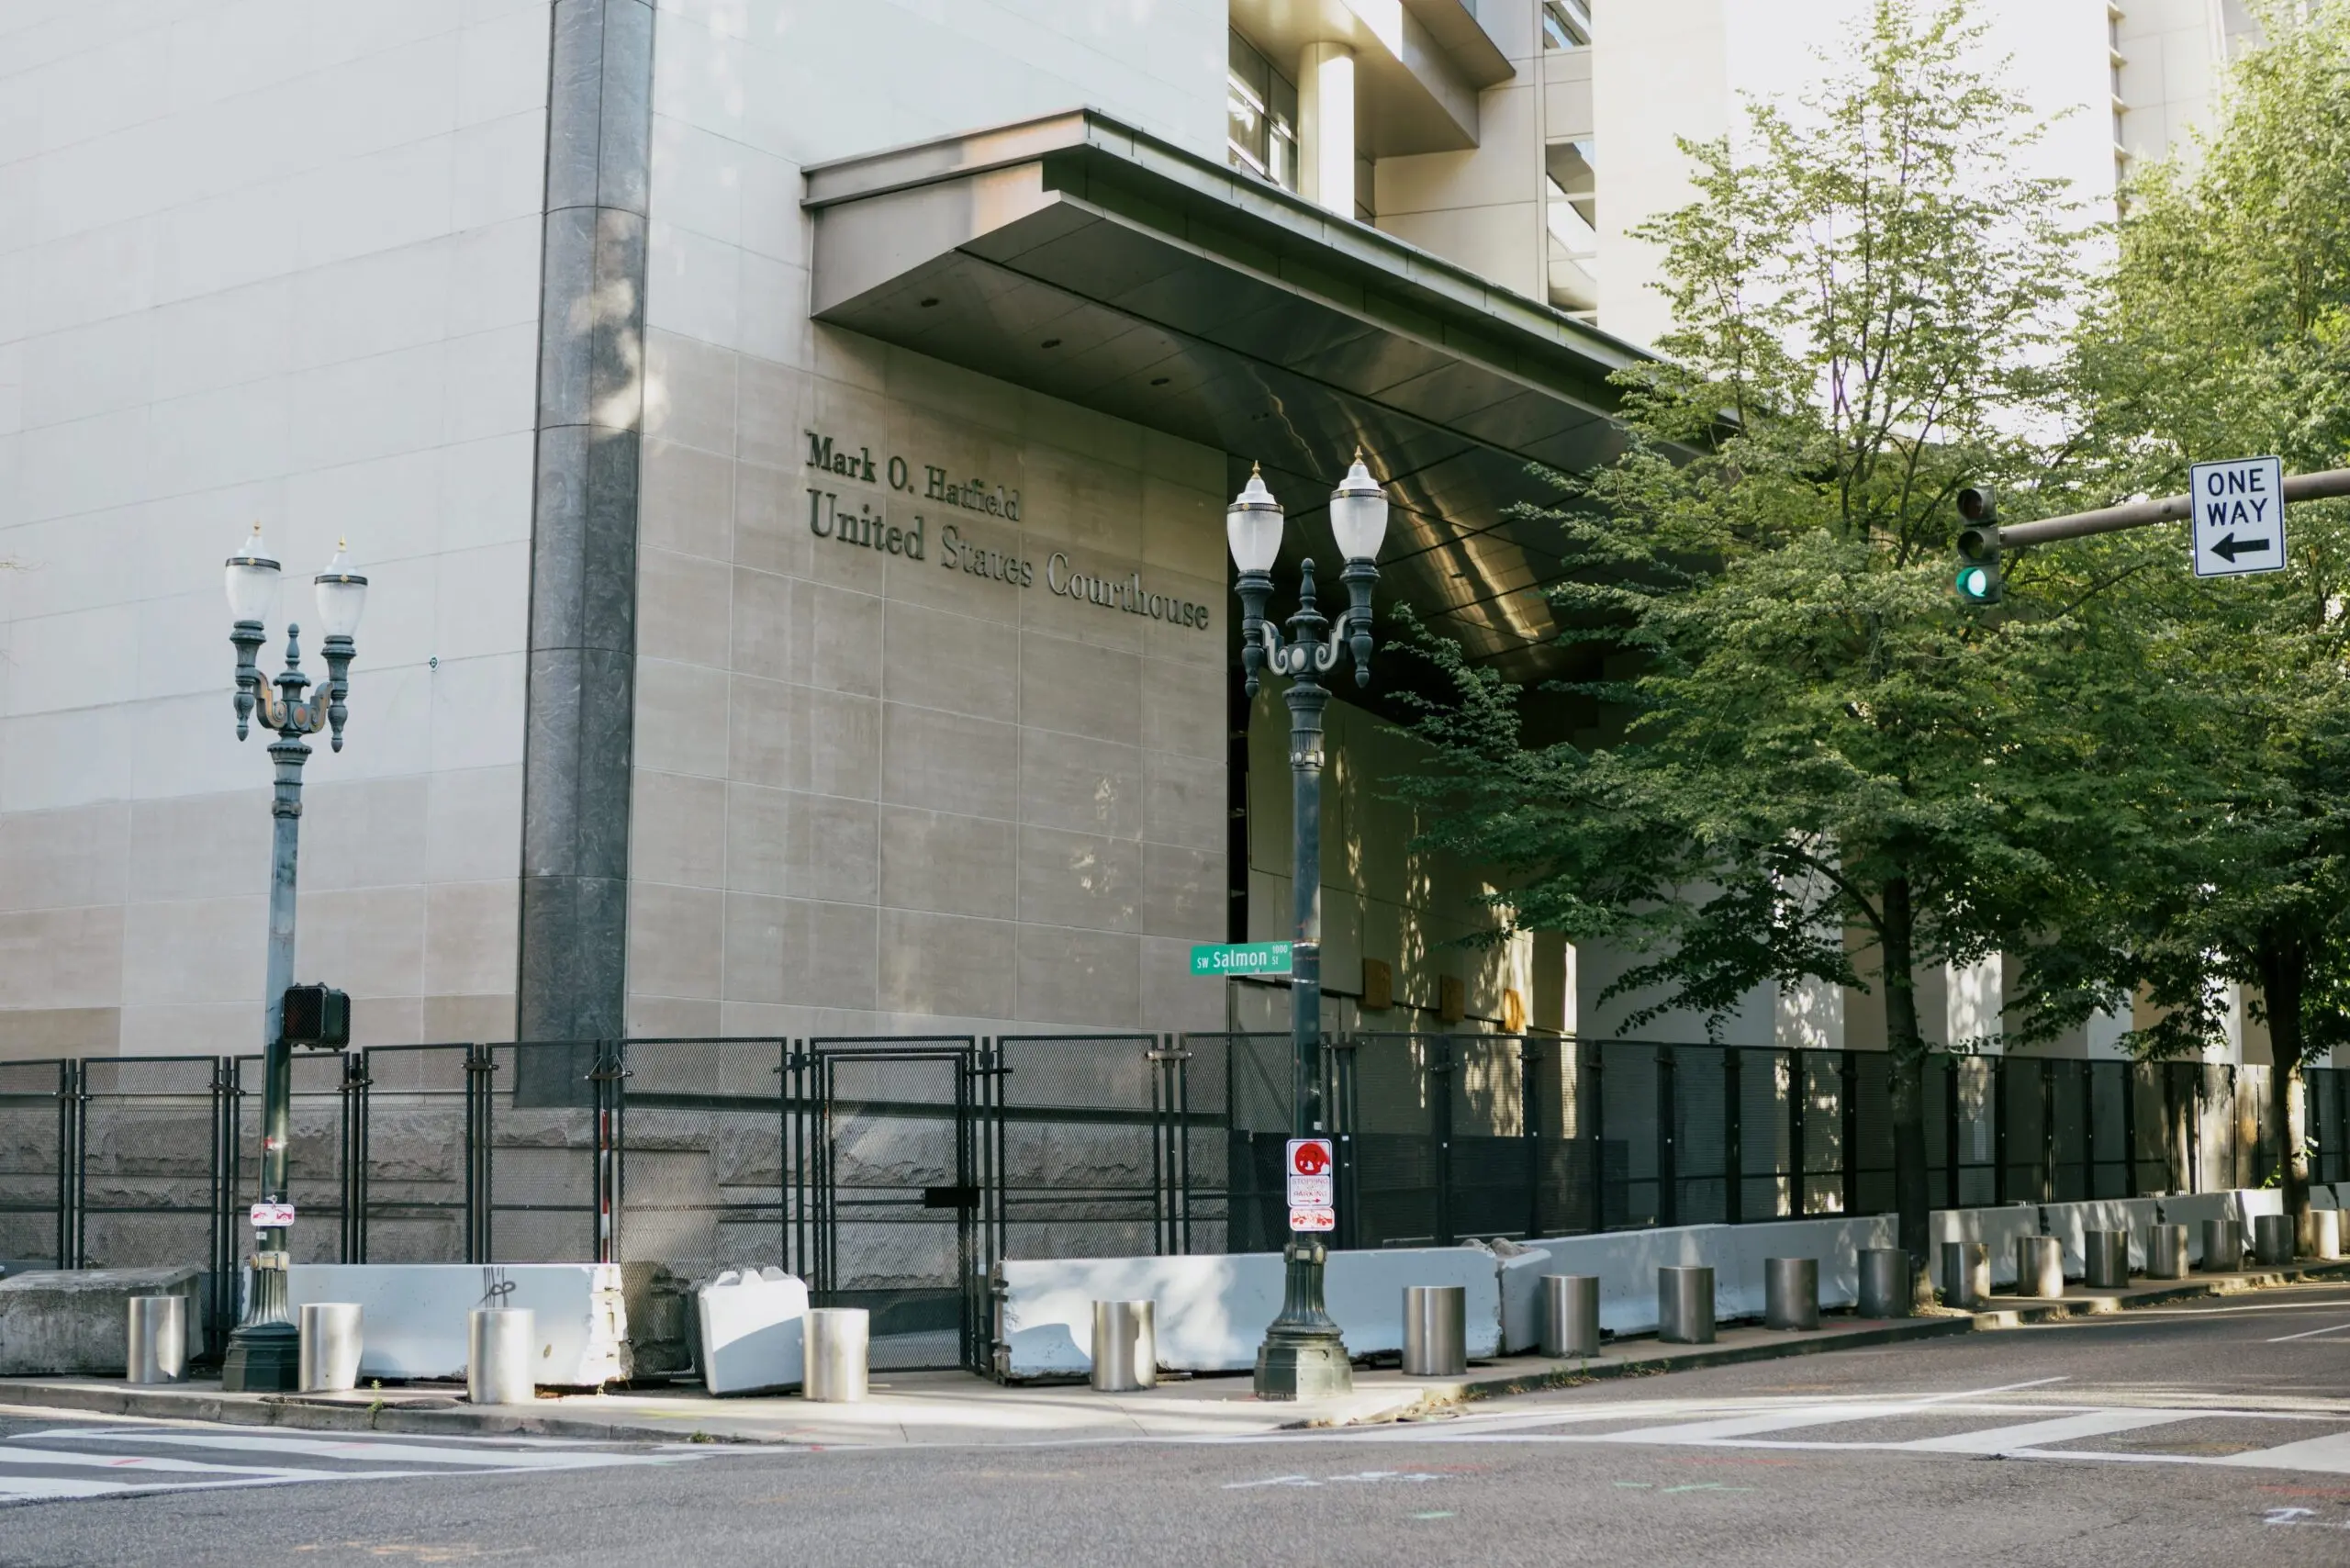 Temporary fences erected in front of a courthouse in Portland, Oregon.